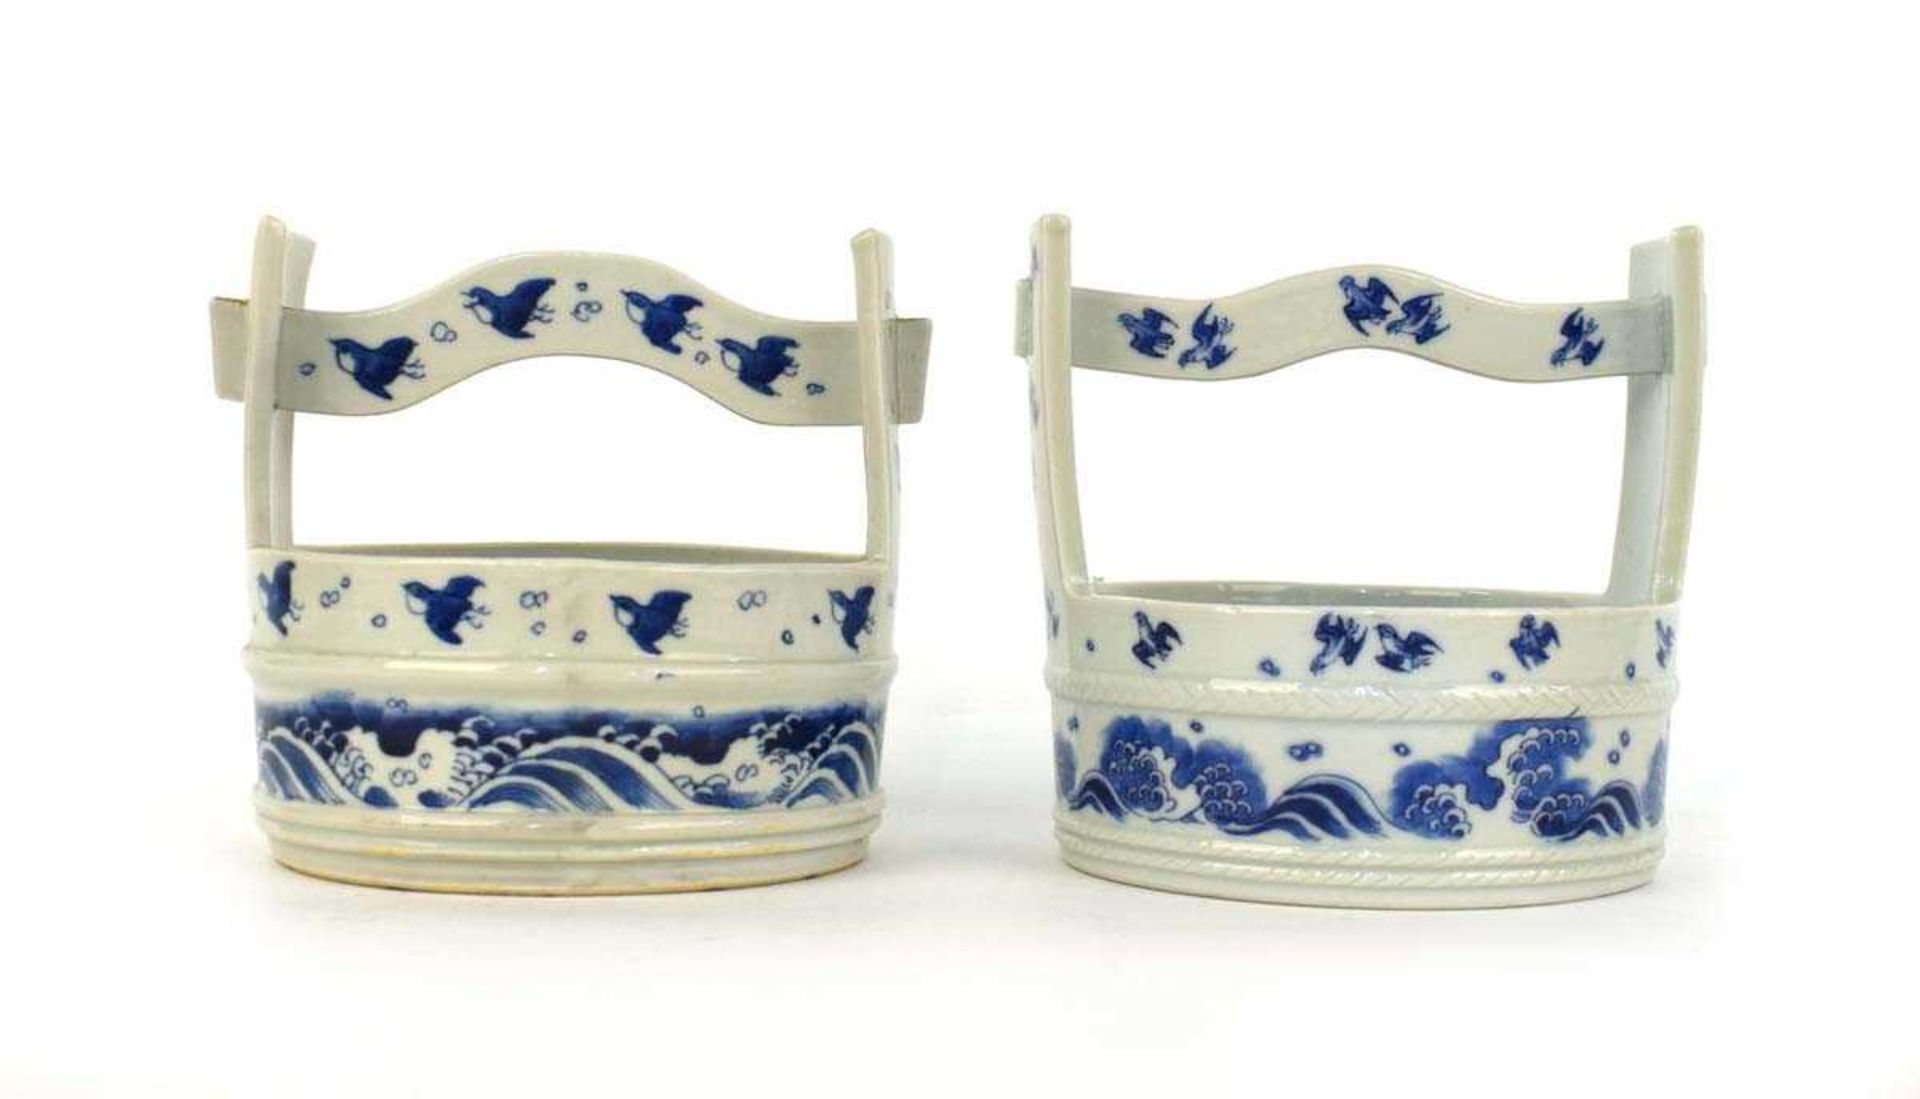 A near pair of Japanese blue and white planters in the form of water carriers, each decorated with